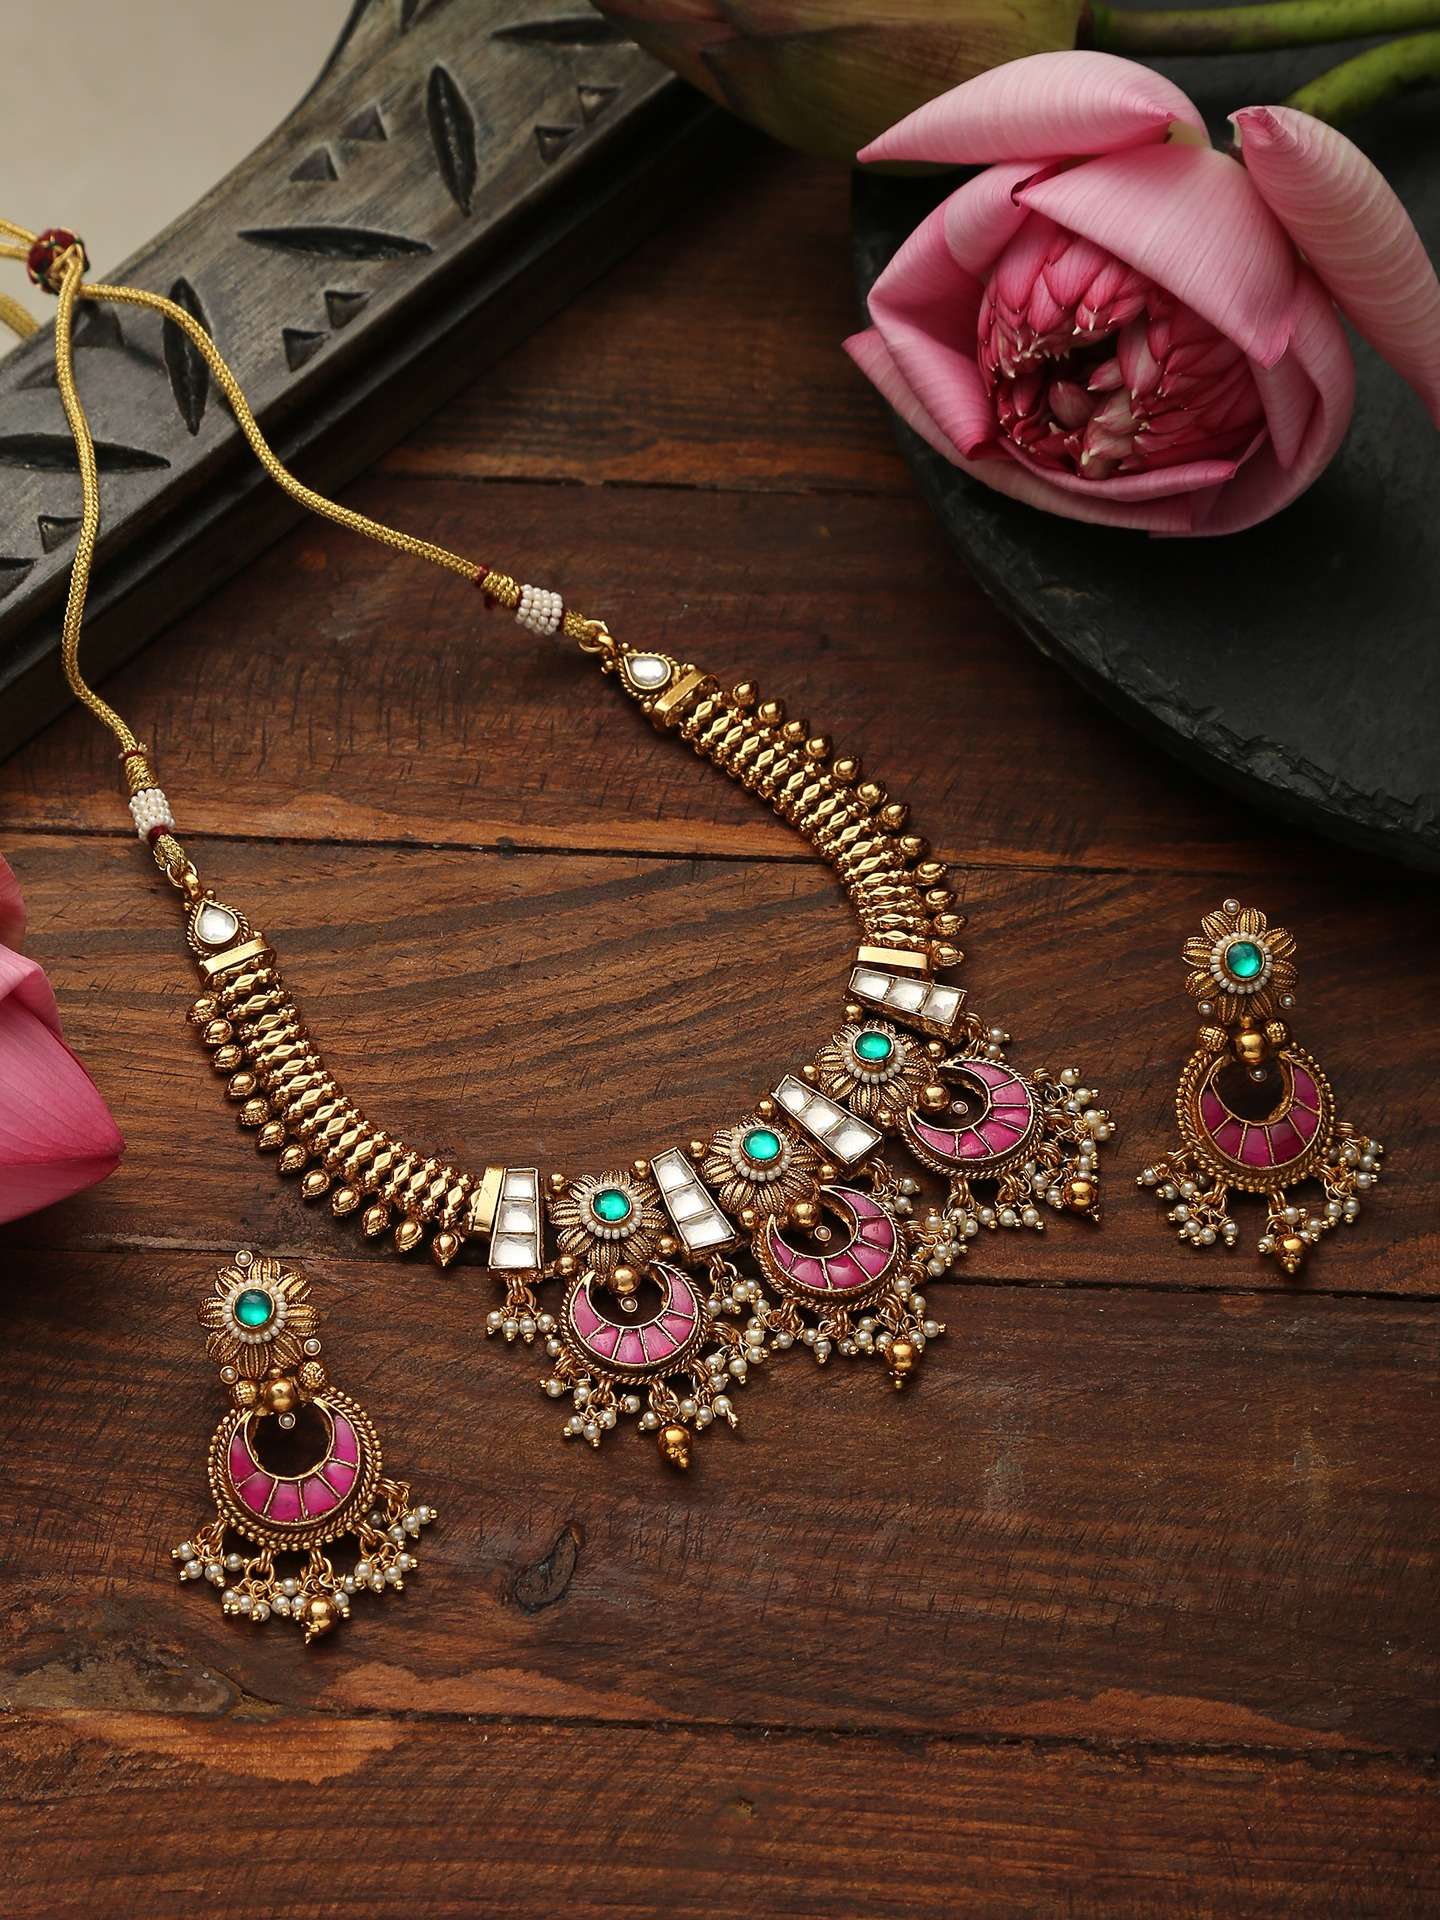 Temple necklace with fuschia details